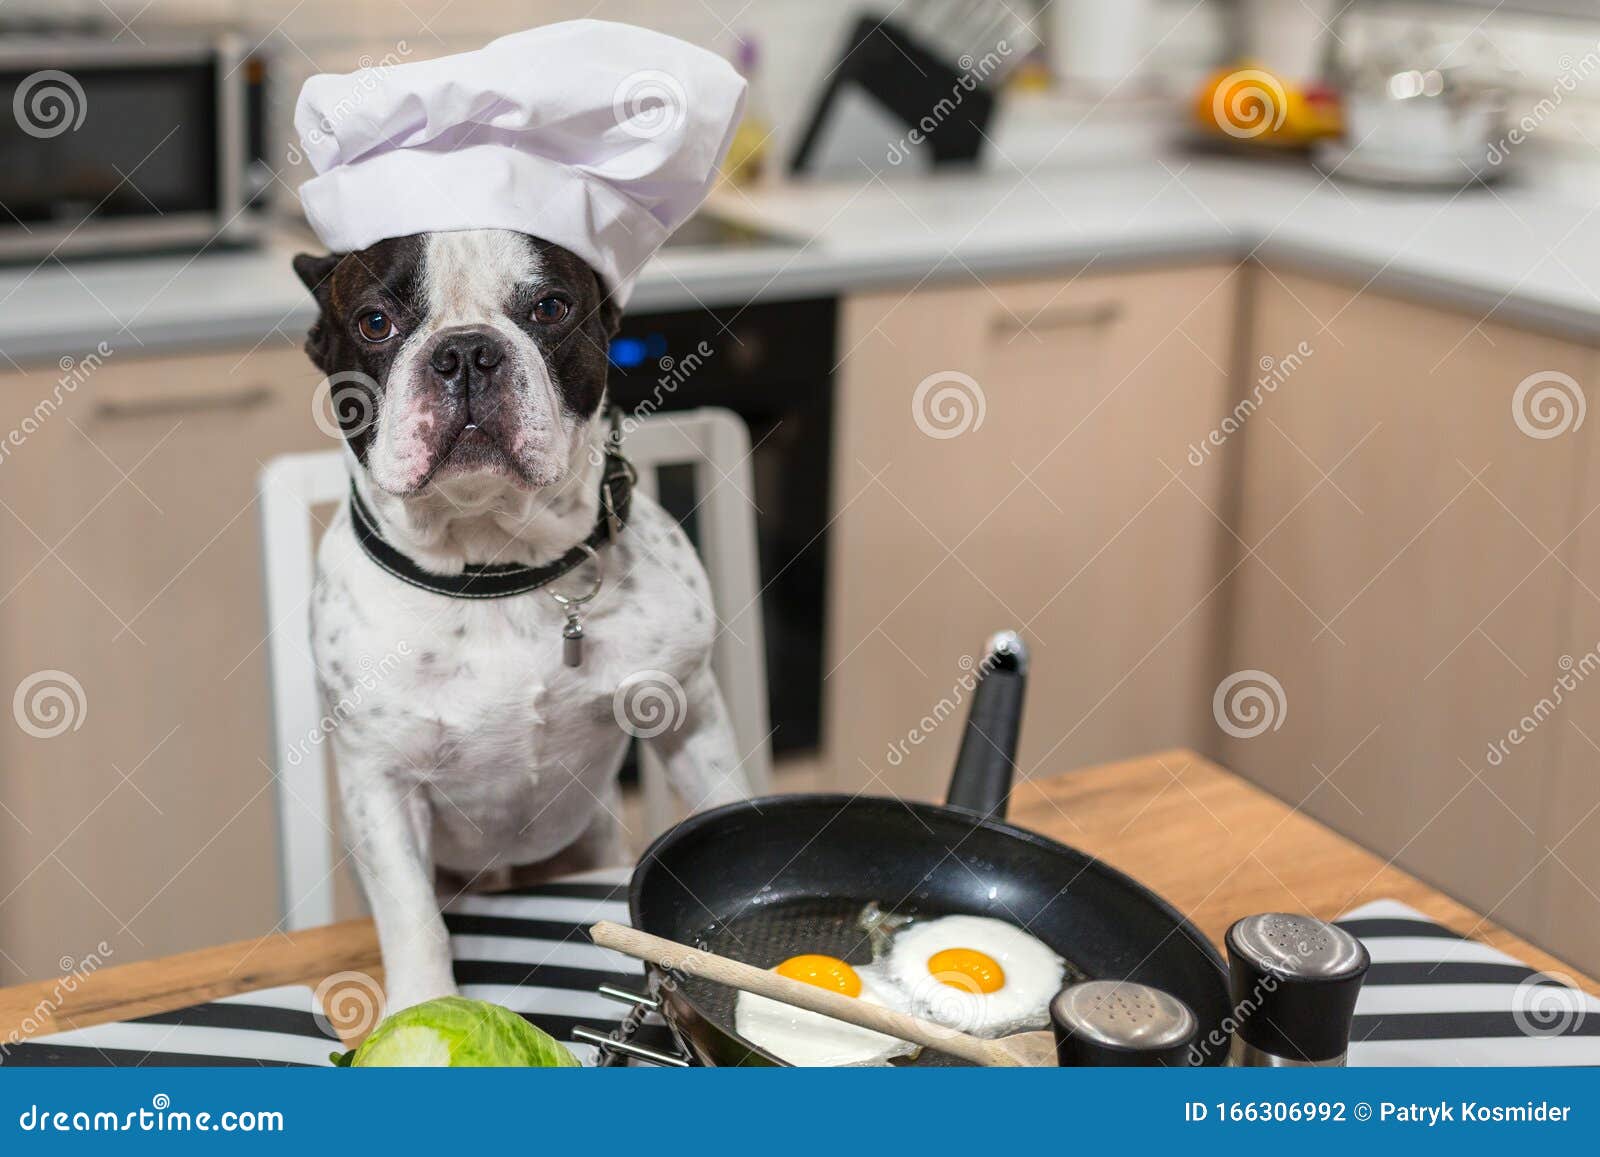 French Bulldog Cook Frying Eggs in the Kitchen Stock Photo - Image of ...